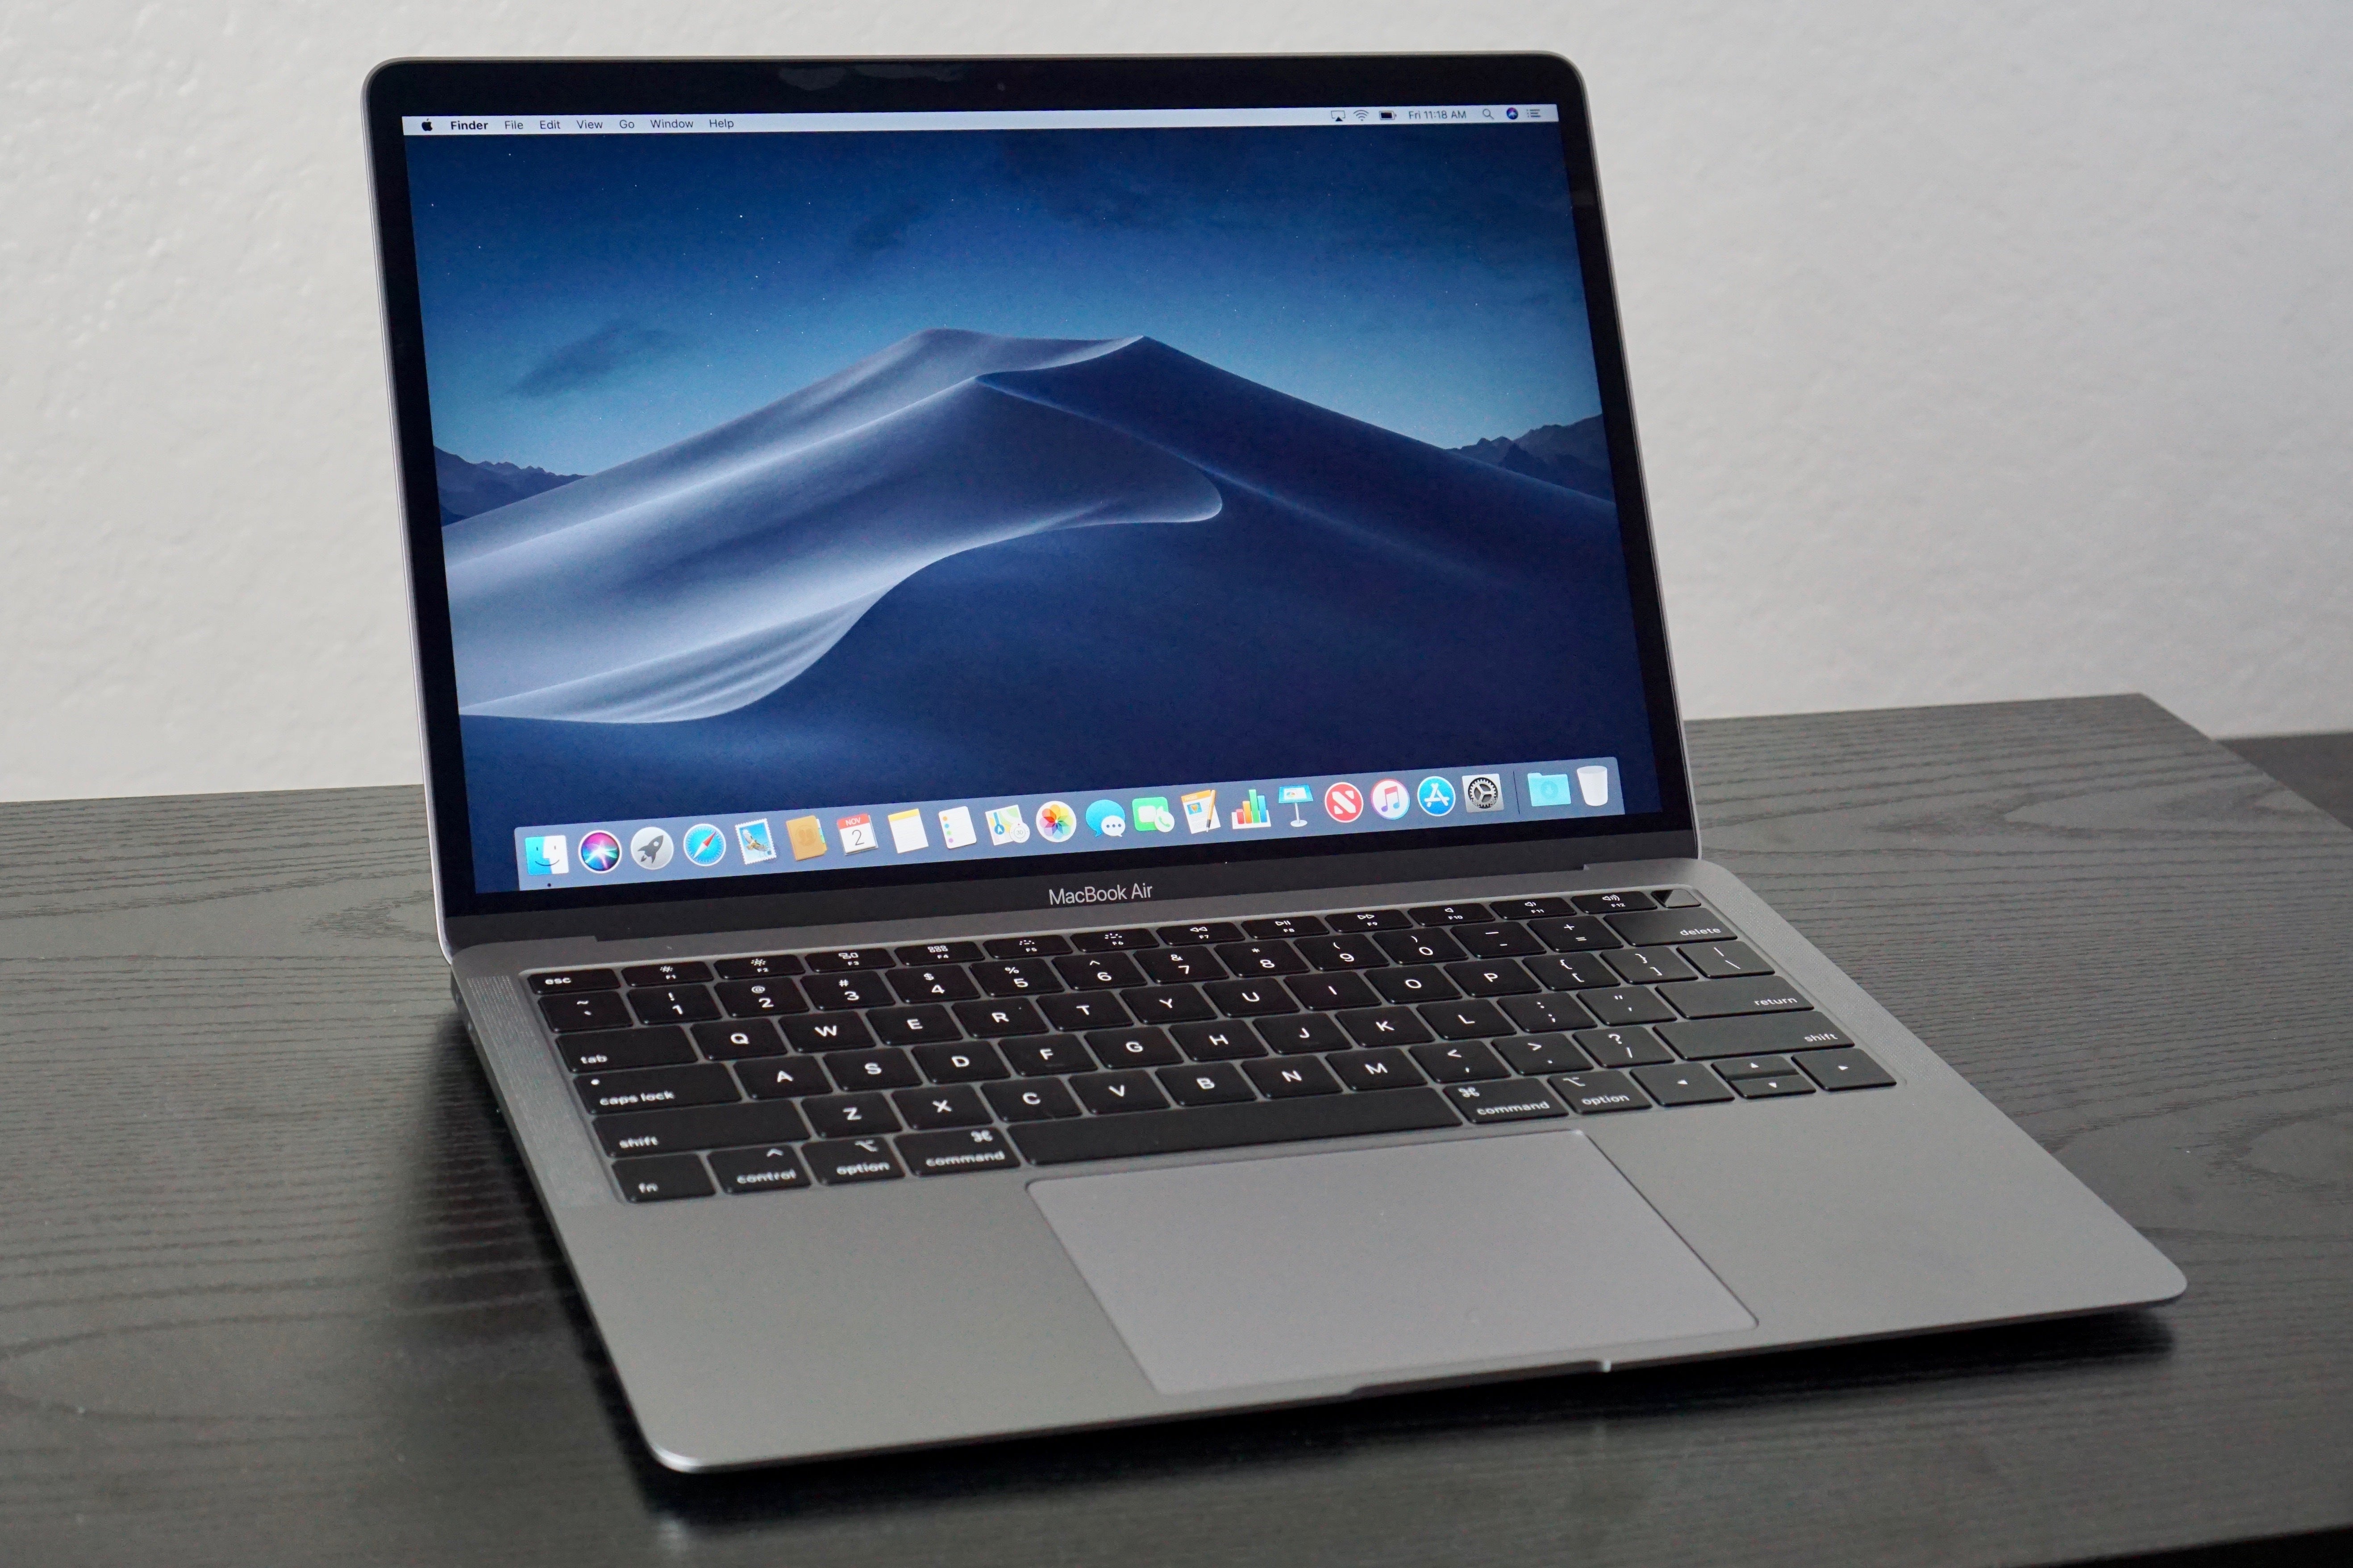 MacBook Air review: Out with the old and in with the new, for better or